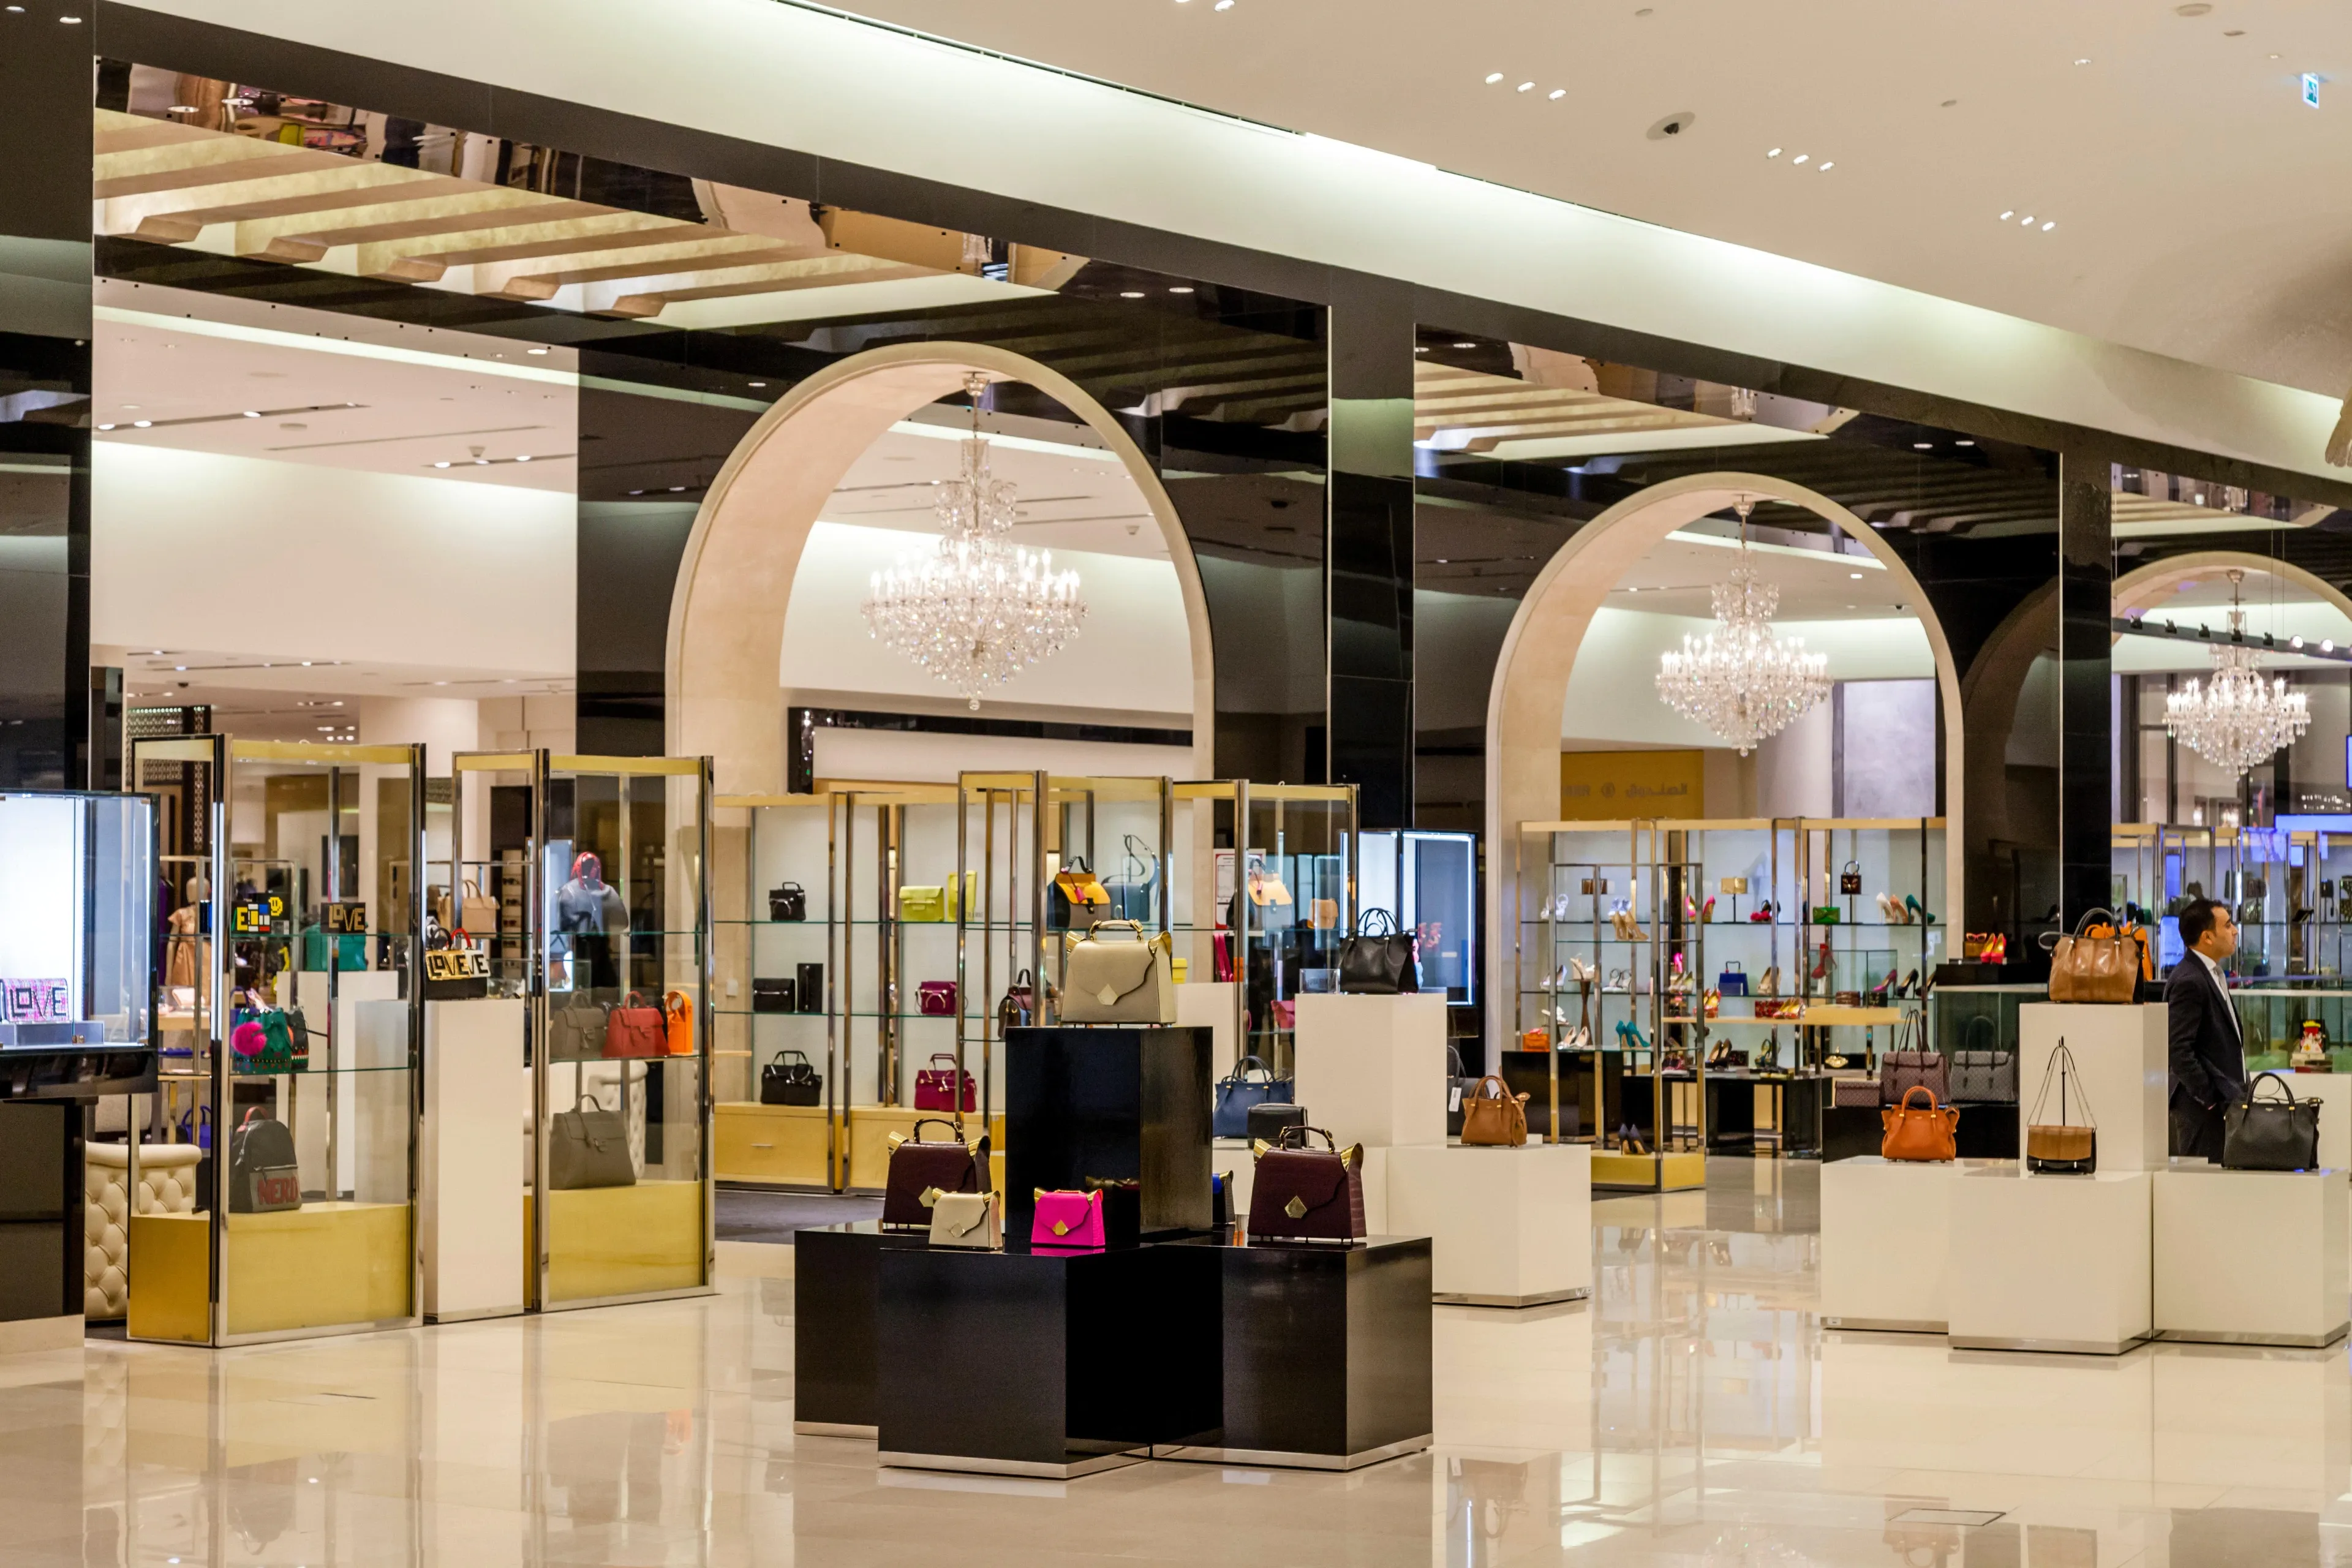 Lagoona Mall in Qatar, middle_east | Handbags,Shoes,Accessories,Clothes,Natural Beauty Products,Cosmetics,Sportswear,Swimwear - Country Helper